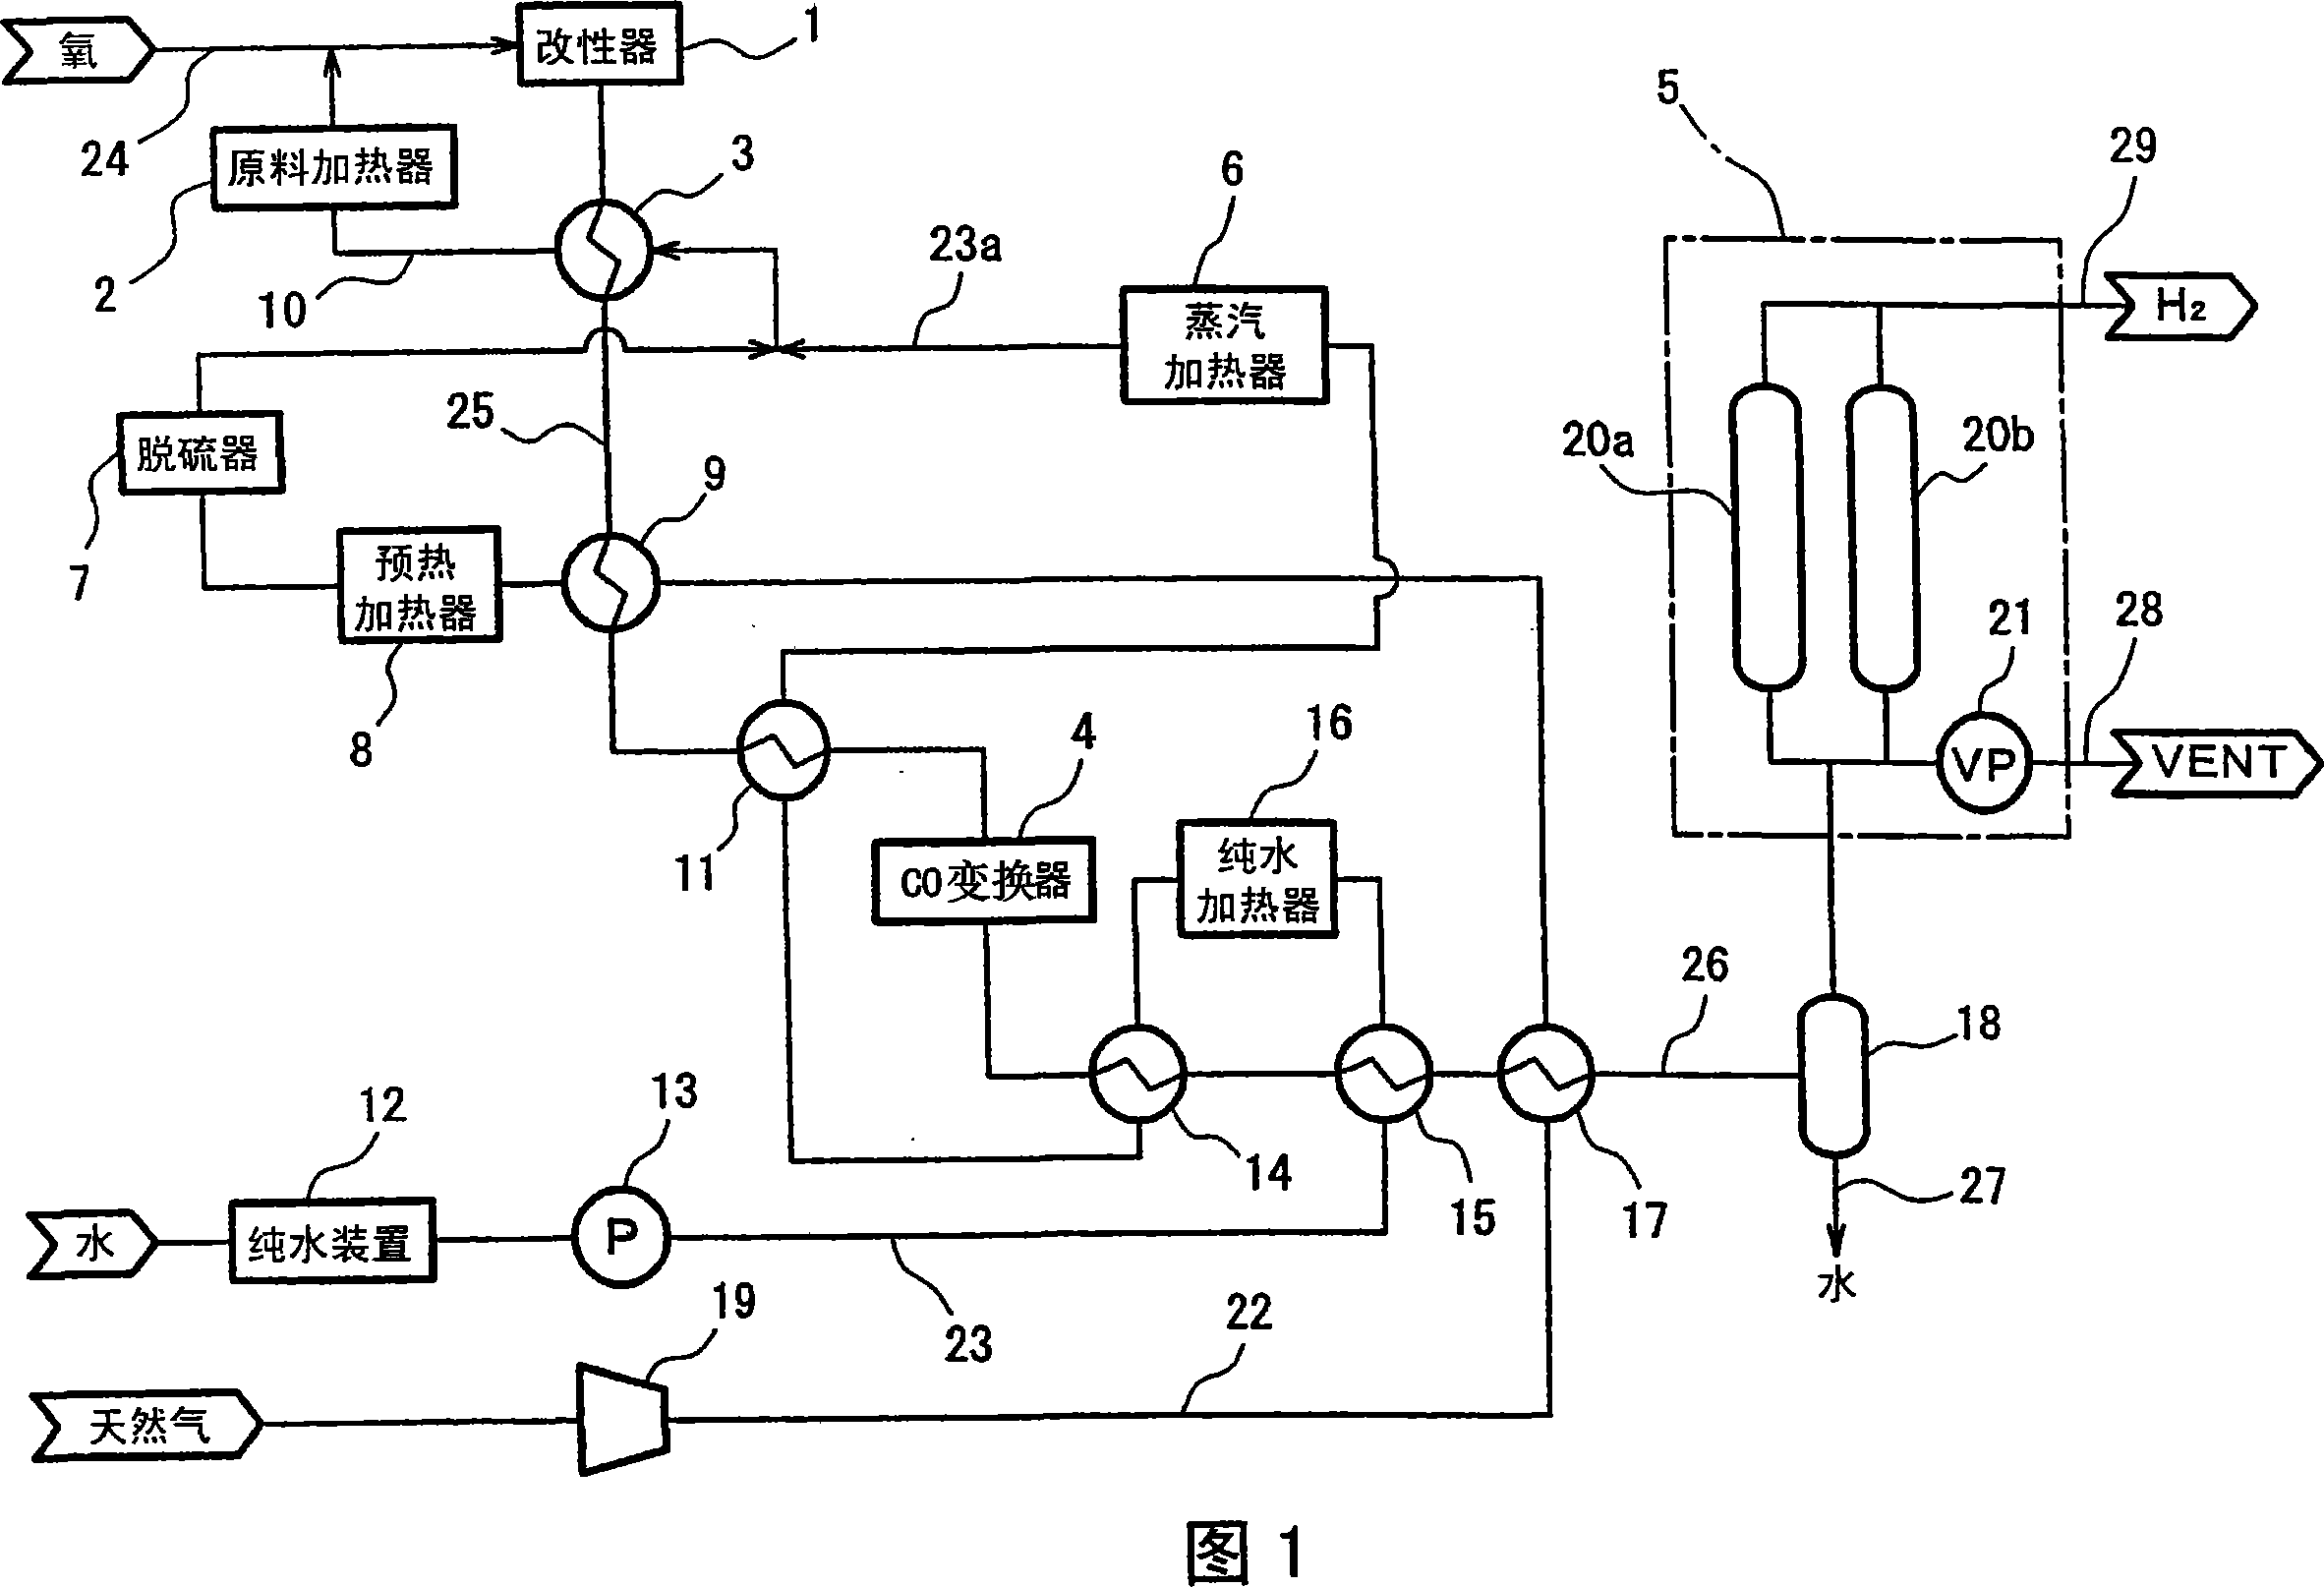 Apparatus and method for hydrogen generation